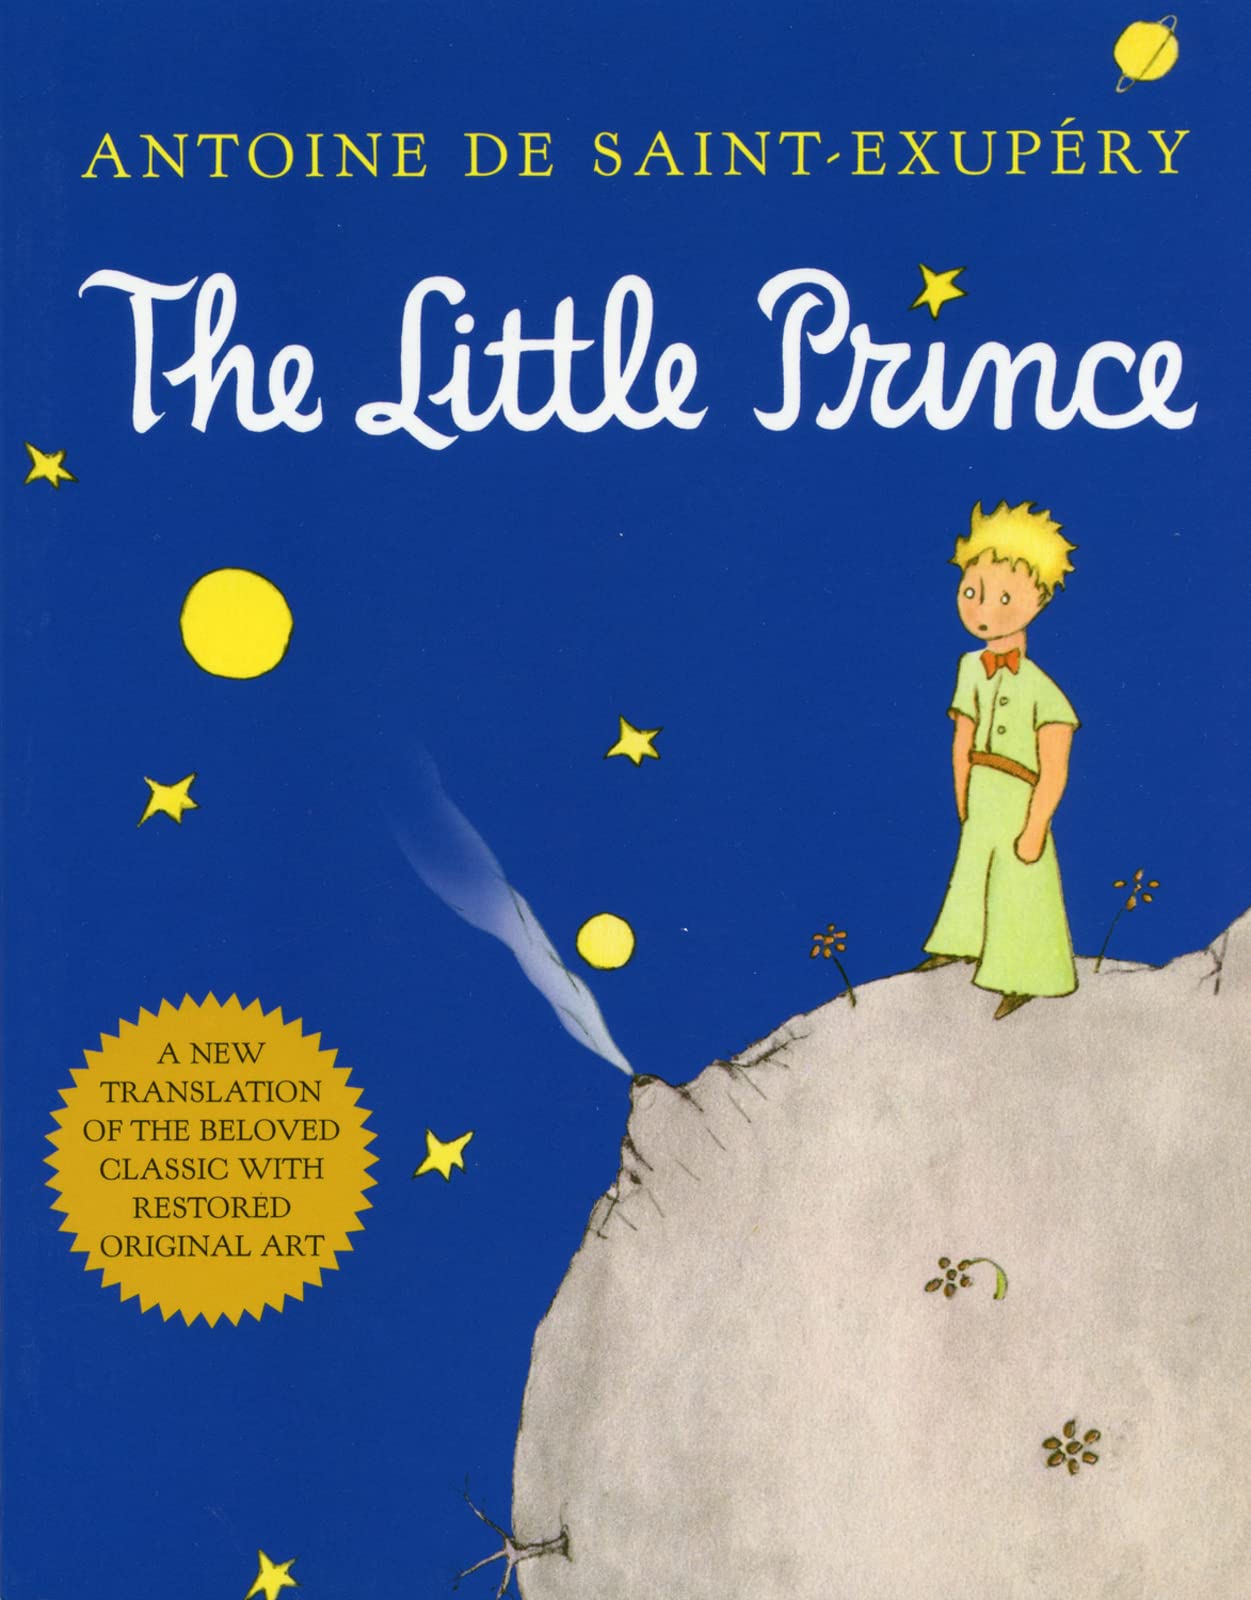 01-The little prince-min